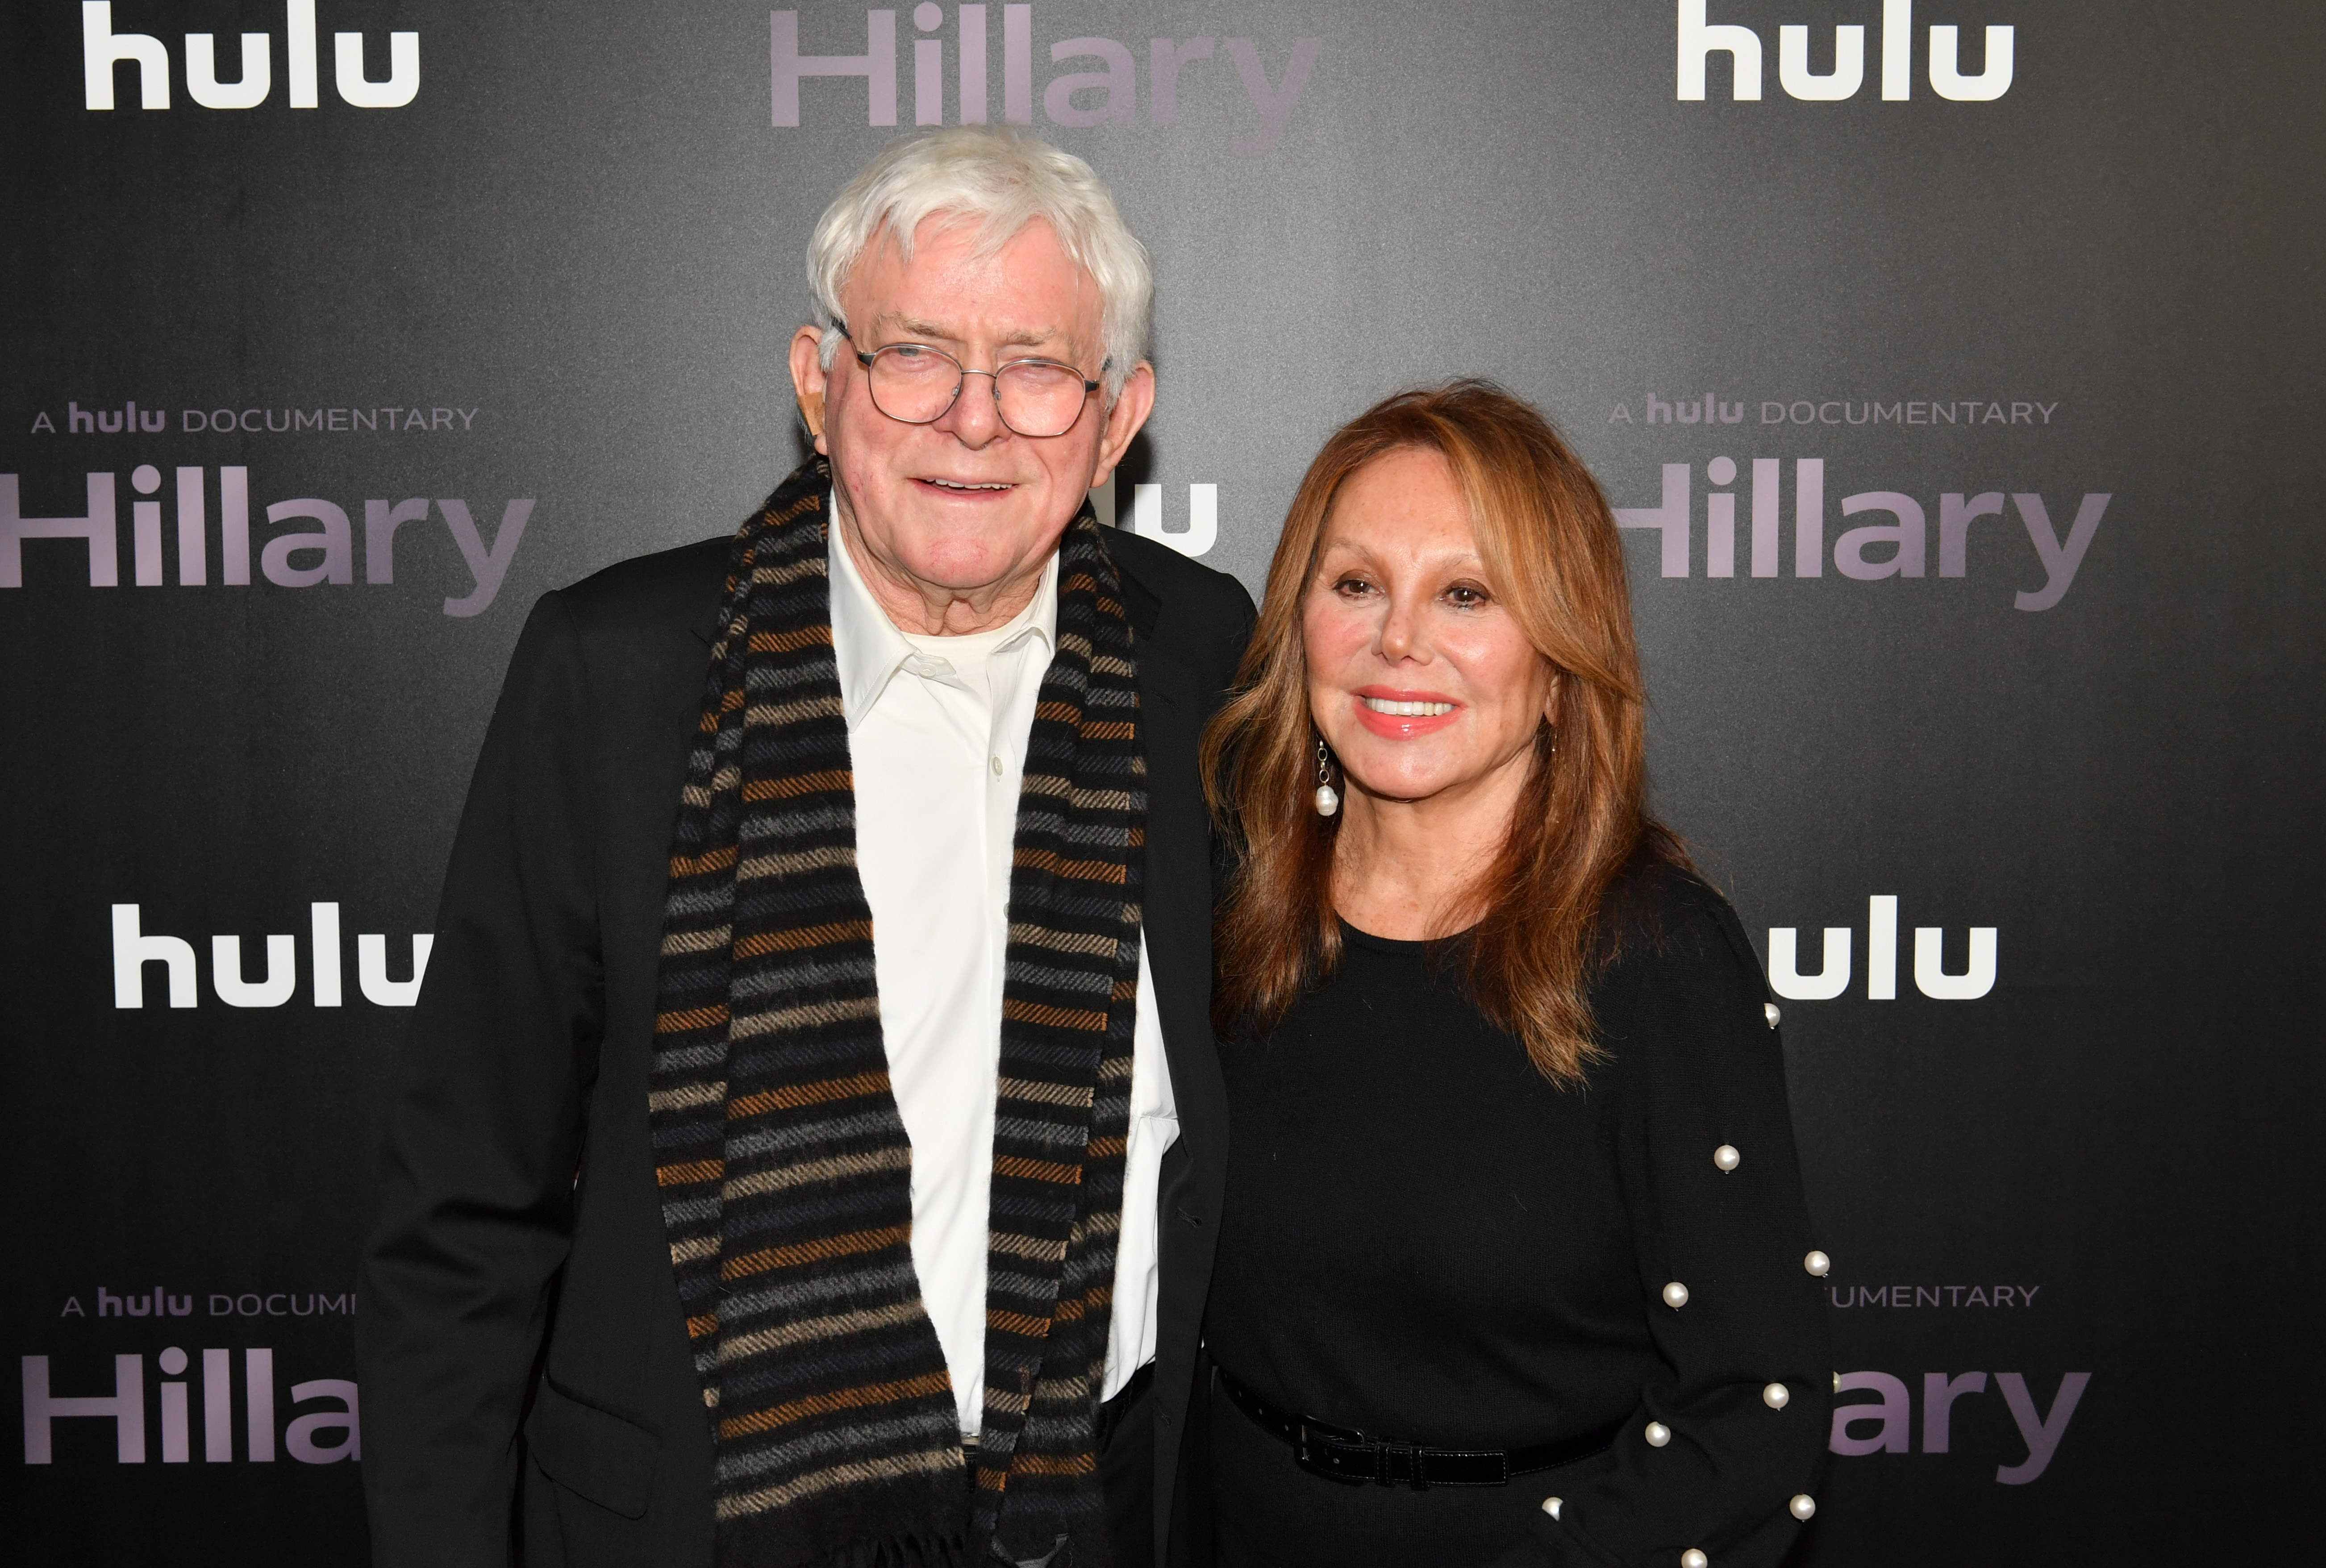 Phil Donahue and Marlo Thomas at the "Hillary" film premiere in New York, 2020 | Source: Getty Images